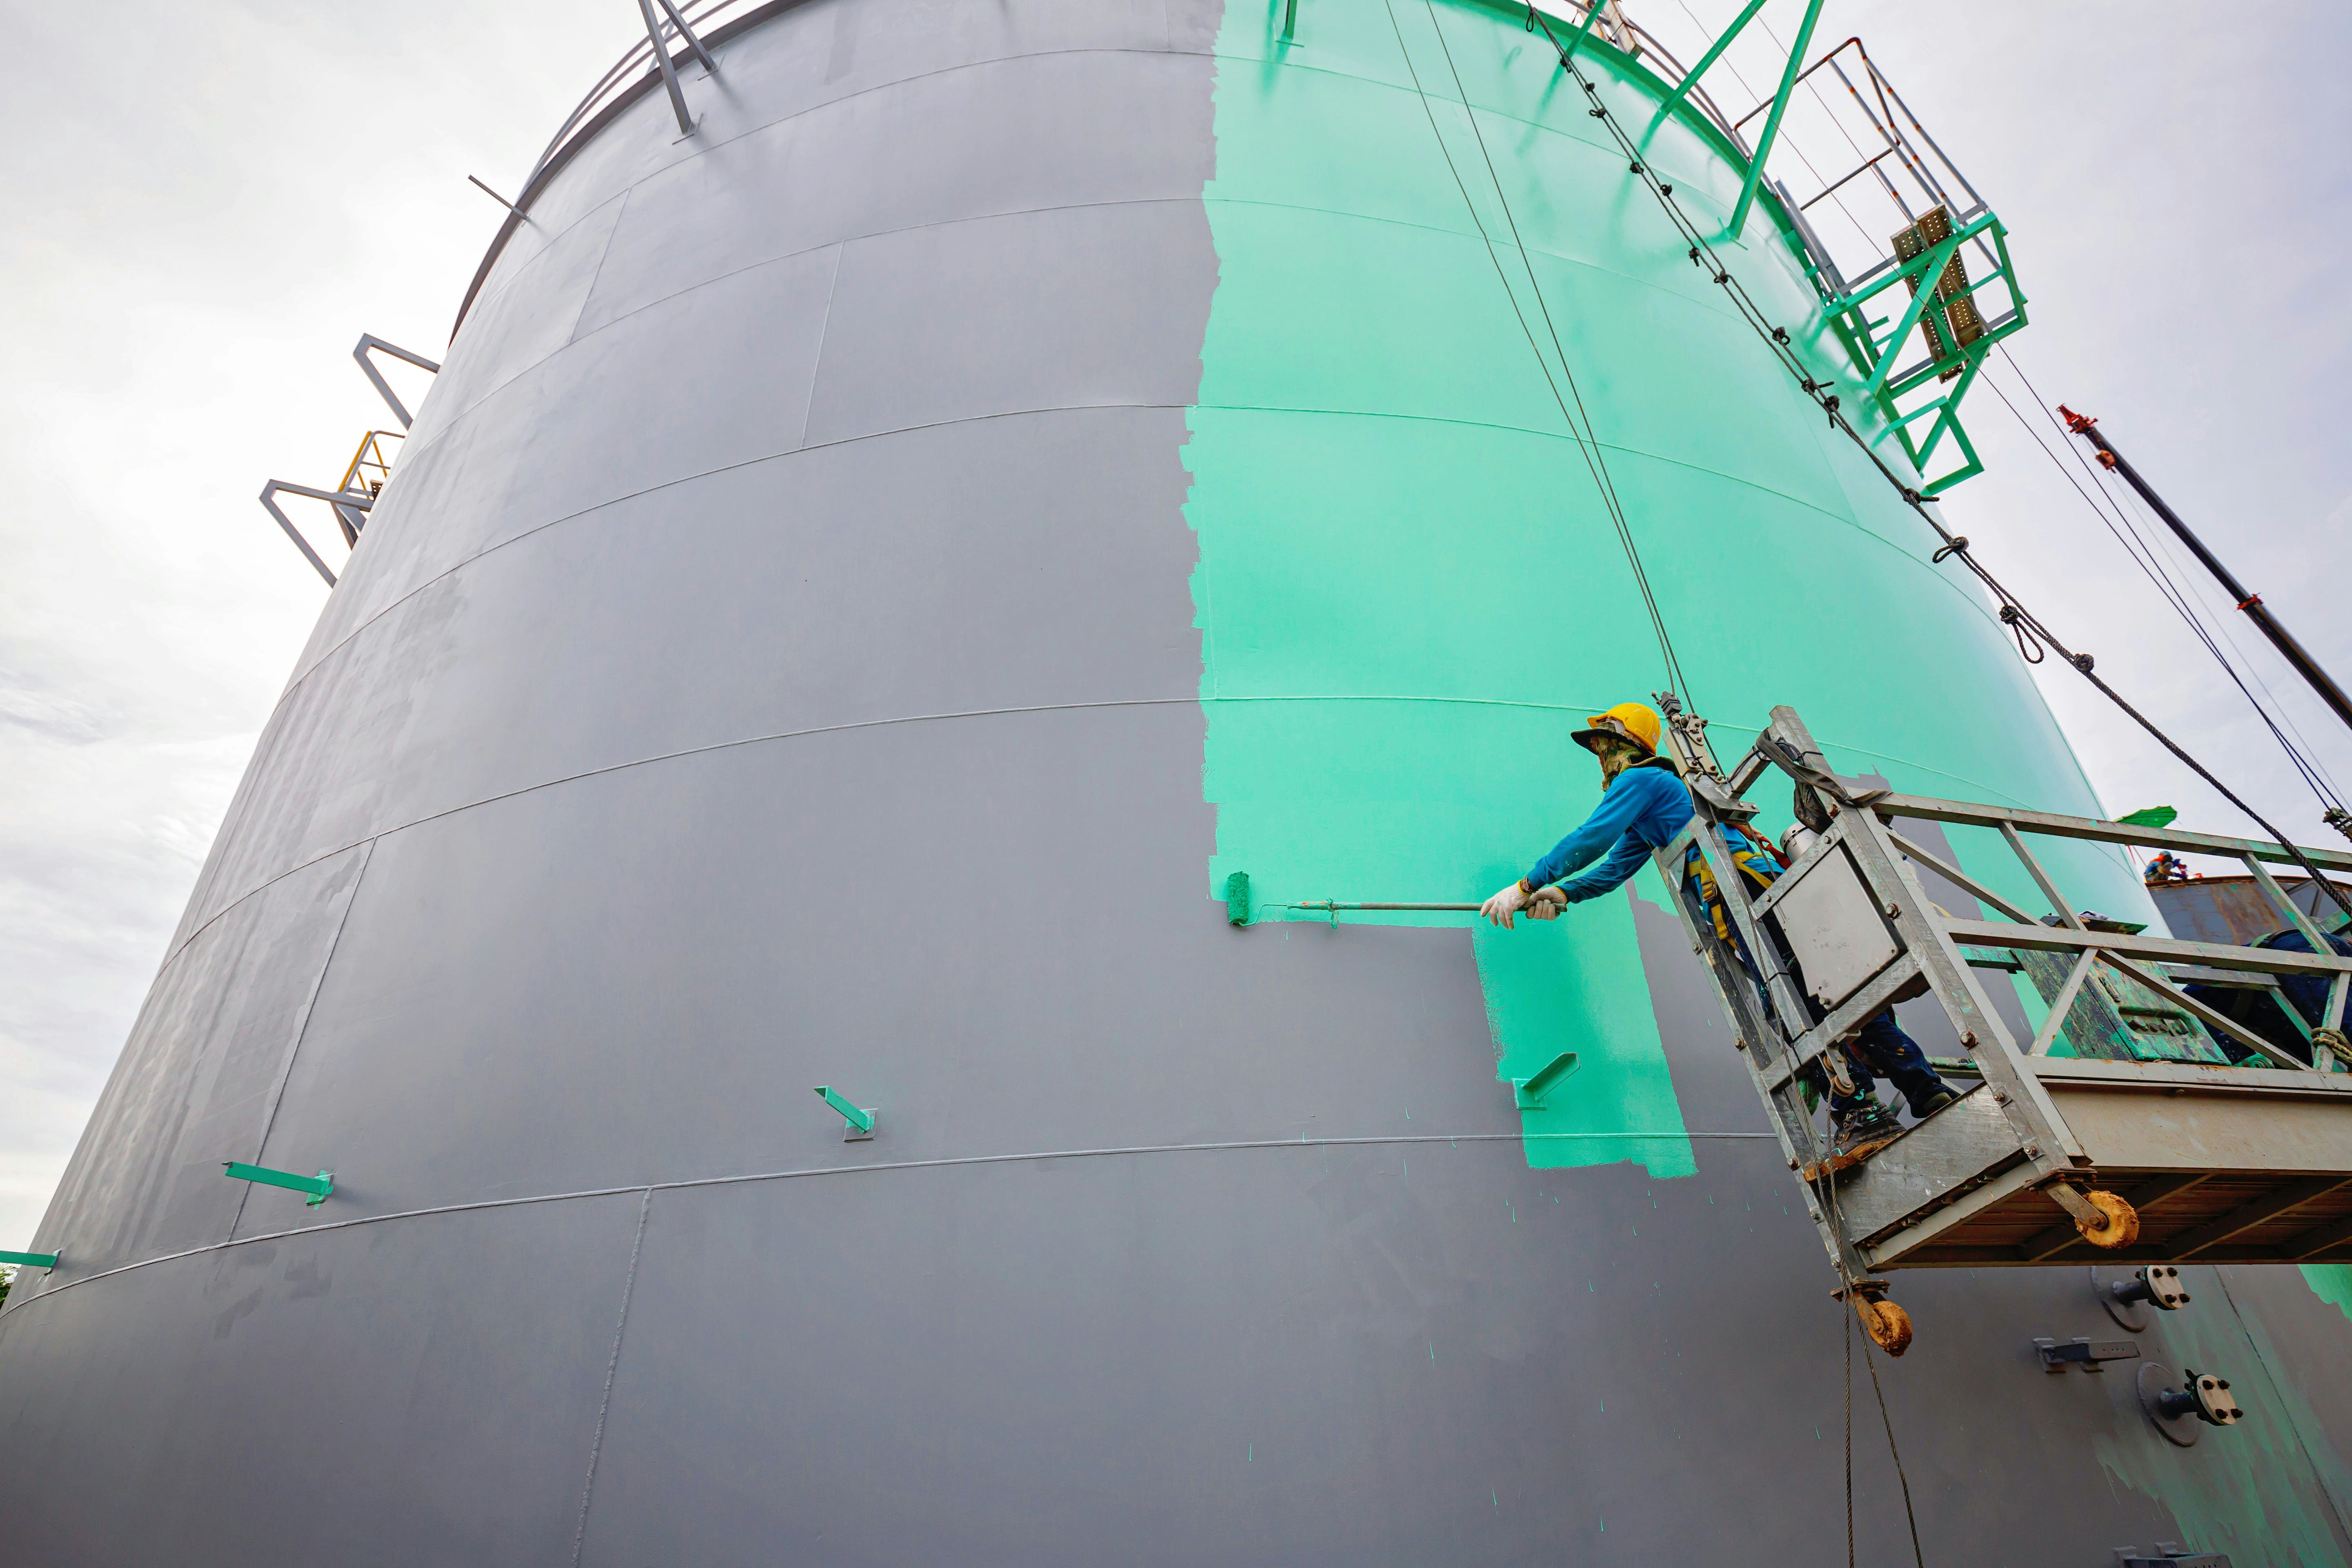 Worker Painting a Tank Oil Surface in Green